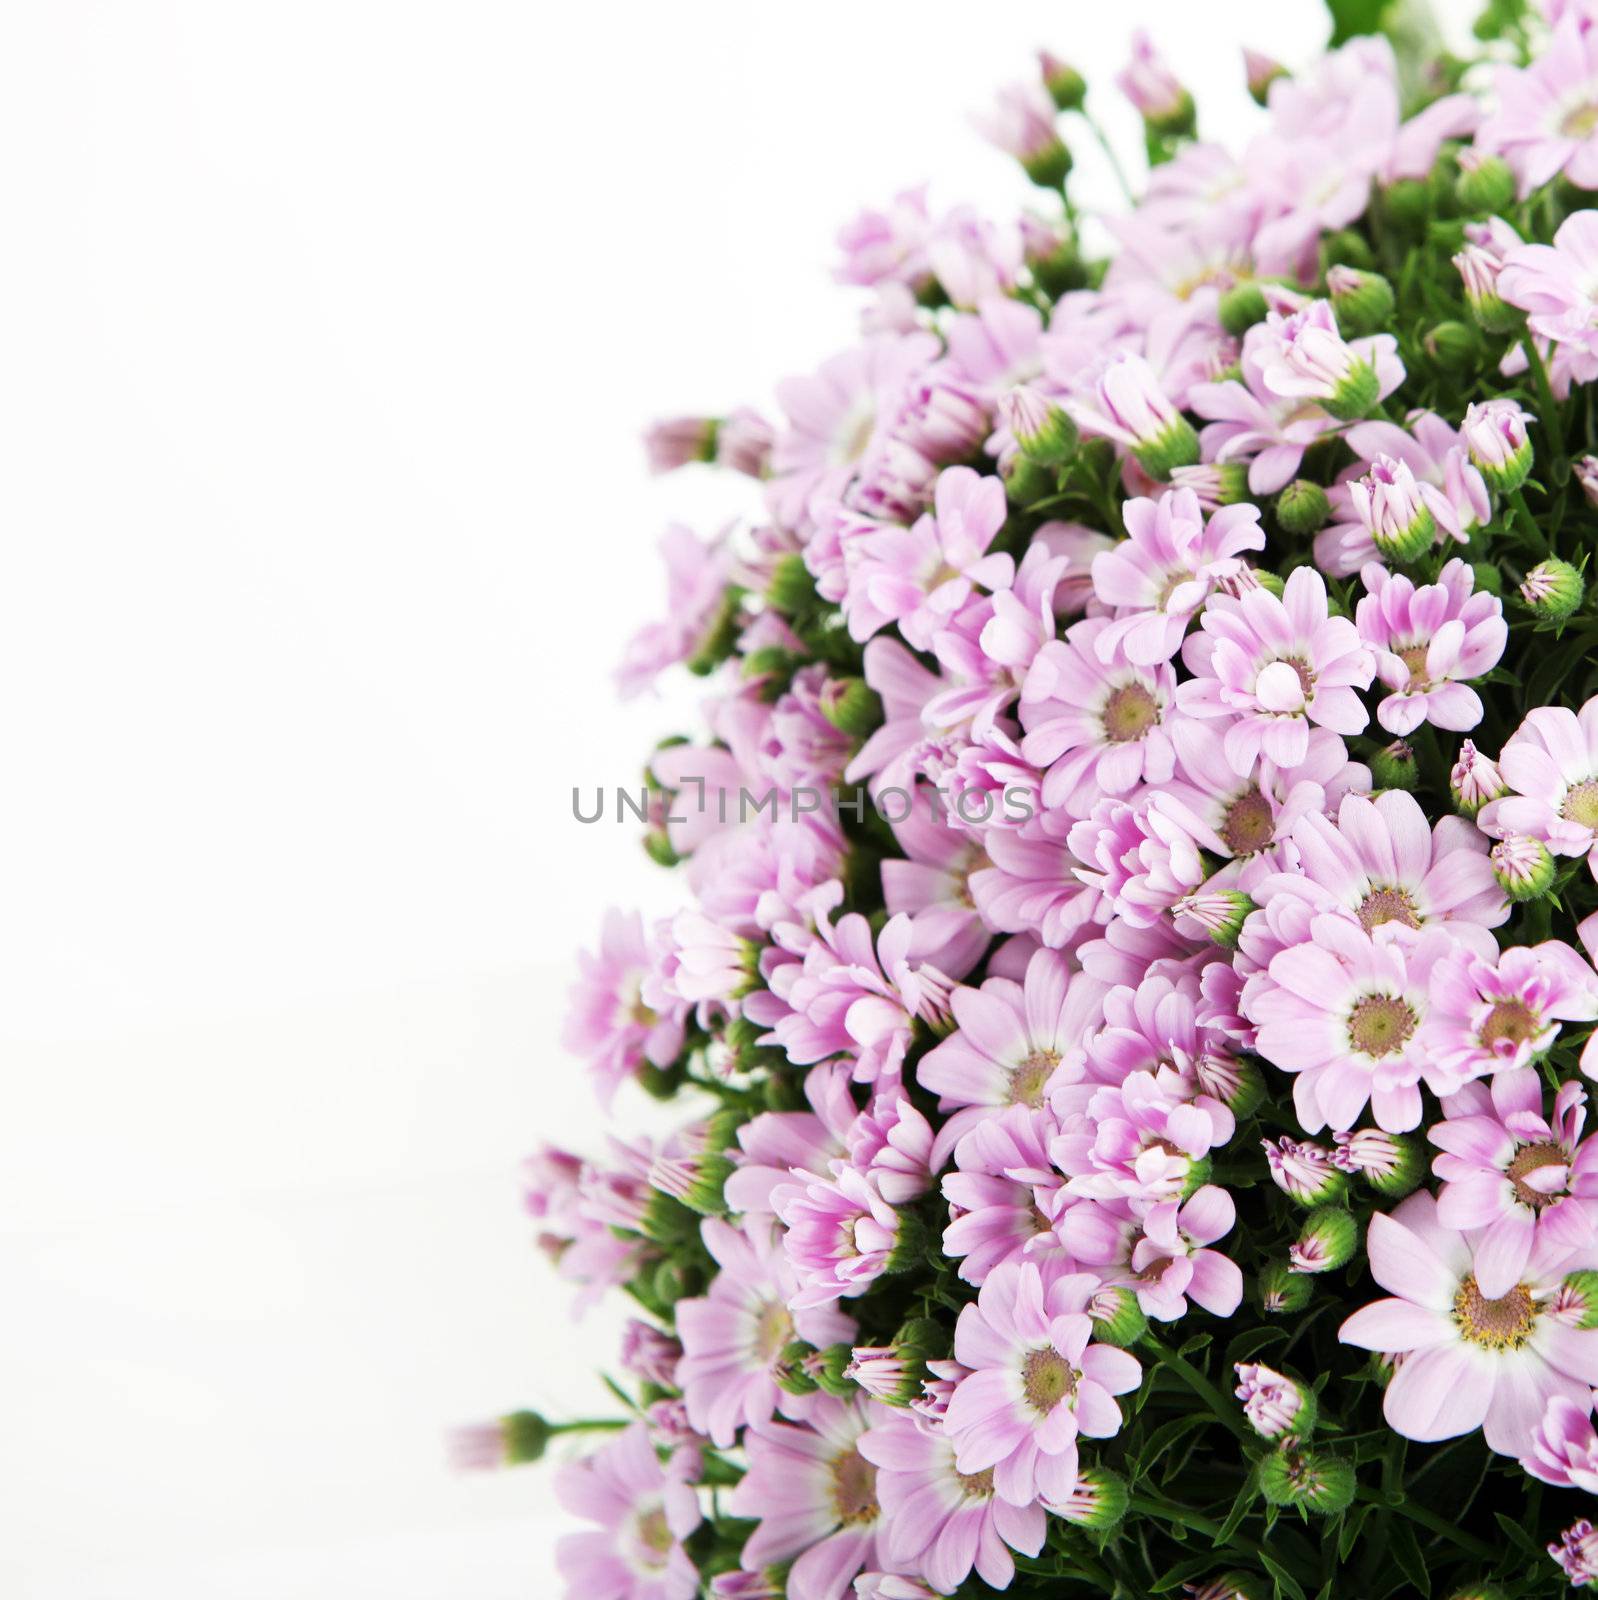 A bouquet of pink flowers by Farina6000